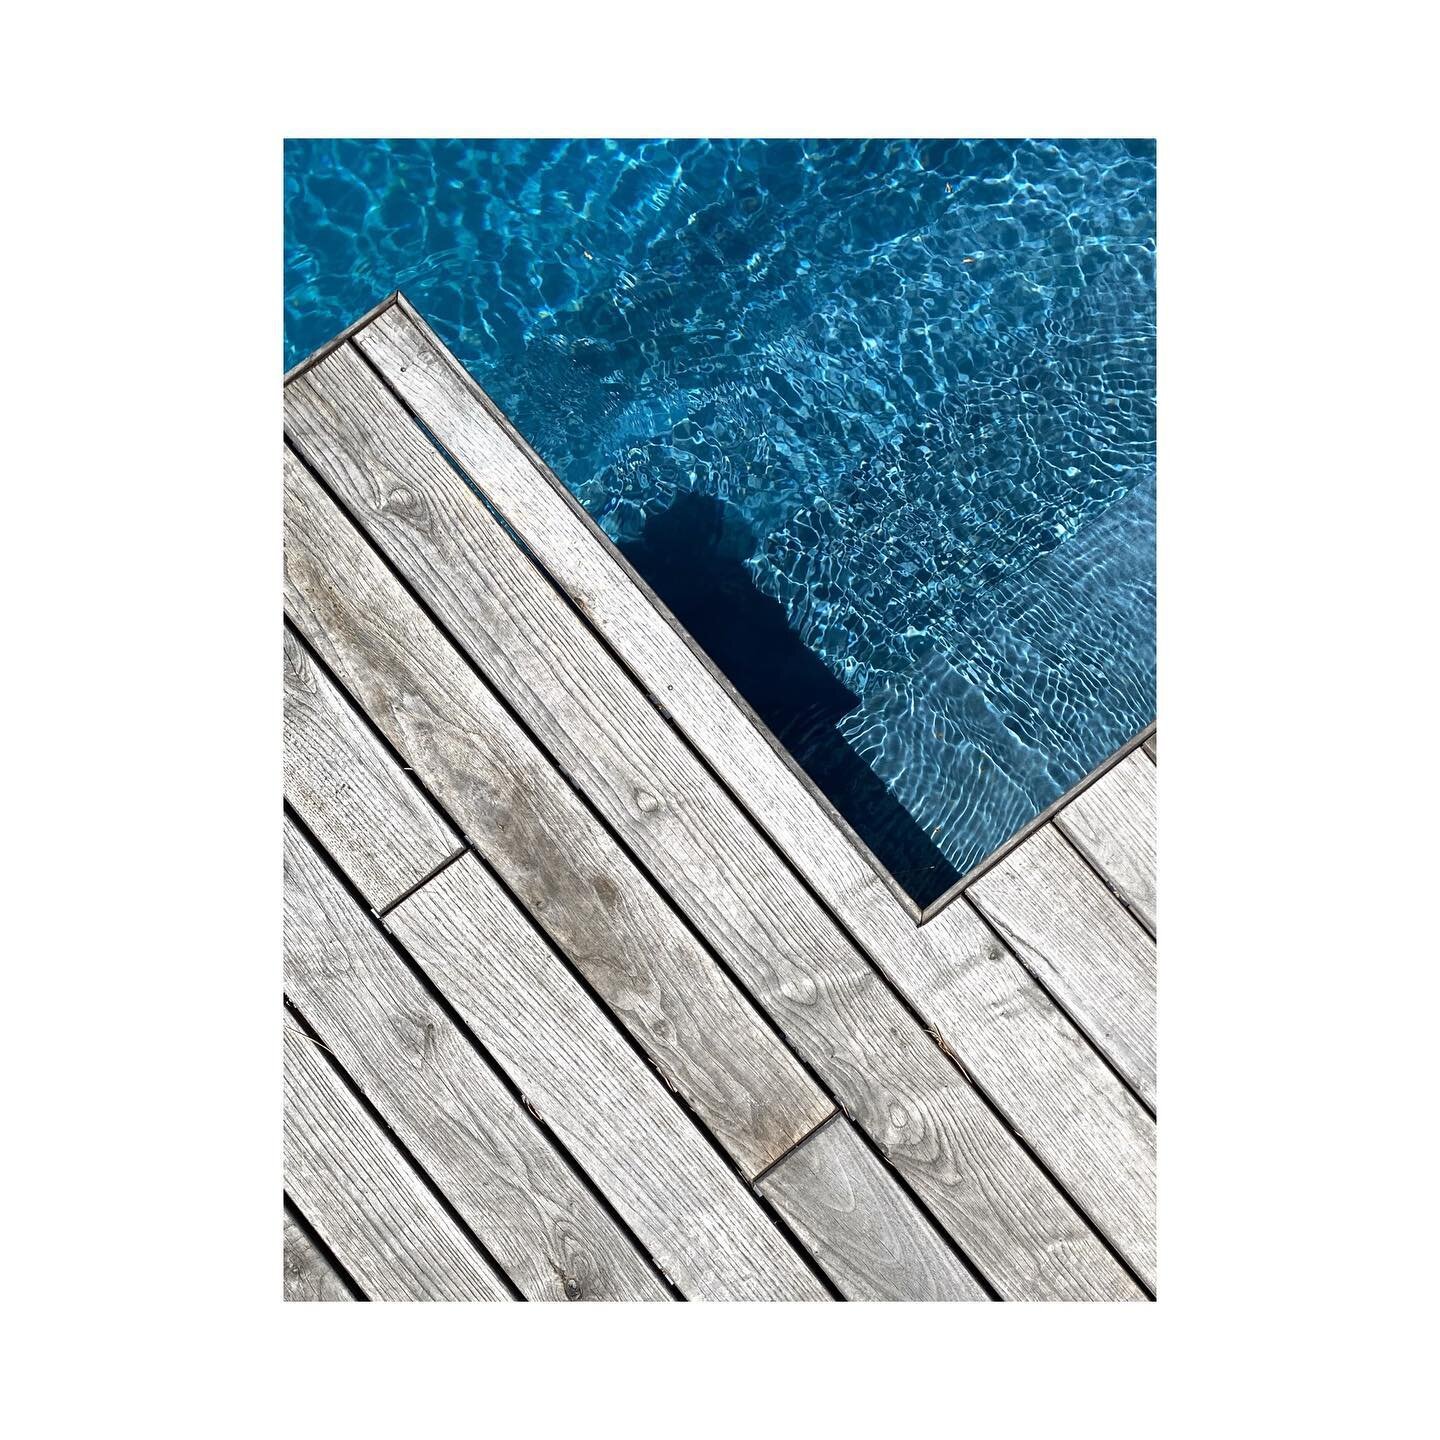 contrast between raw wood and bright water
.
.
.
.
#iriscantantearquitectura #arquitectura #architecture #simplicity #lessismoreoutdoors #softminimalism #softminimalstyle #pooldeck #outdoordesign #pool #piscina #keepitsimple